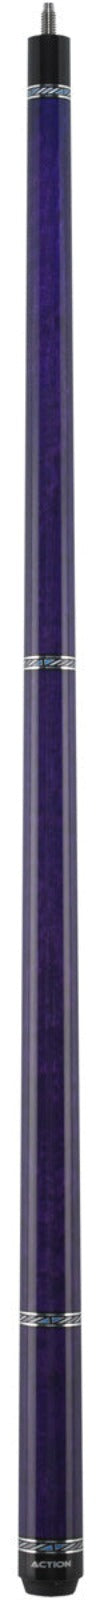 Action VAL25 Pool Cue